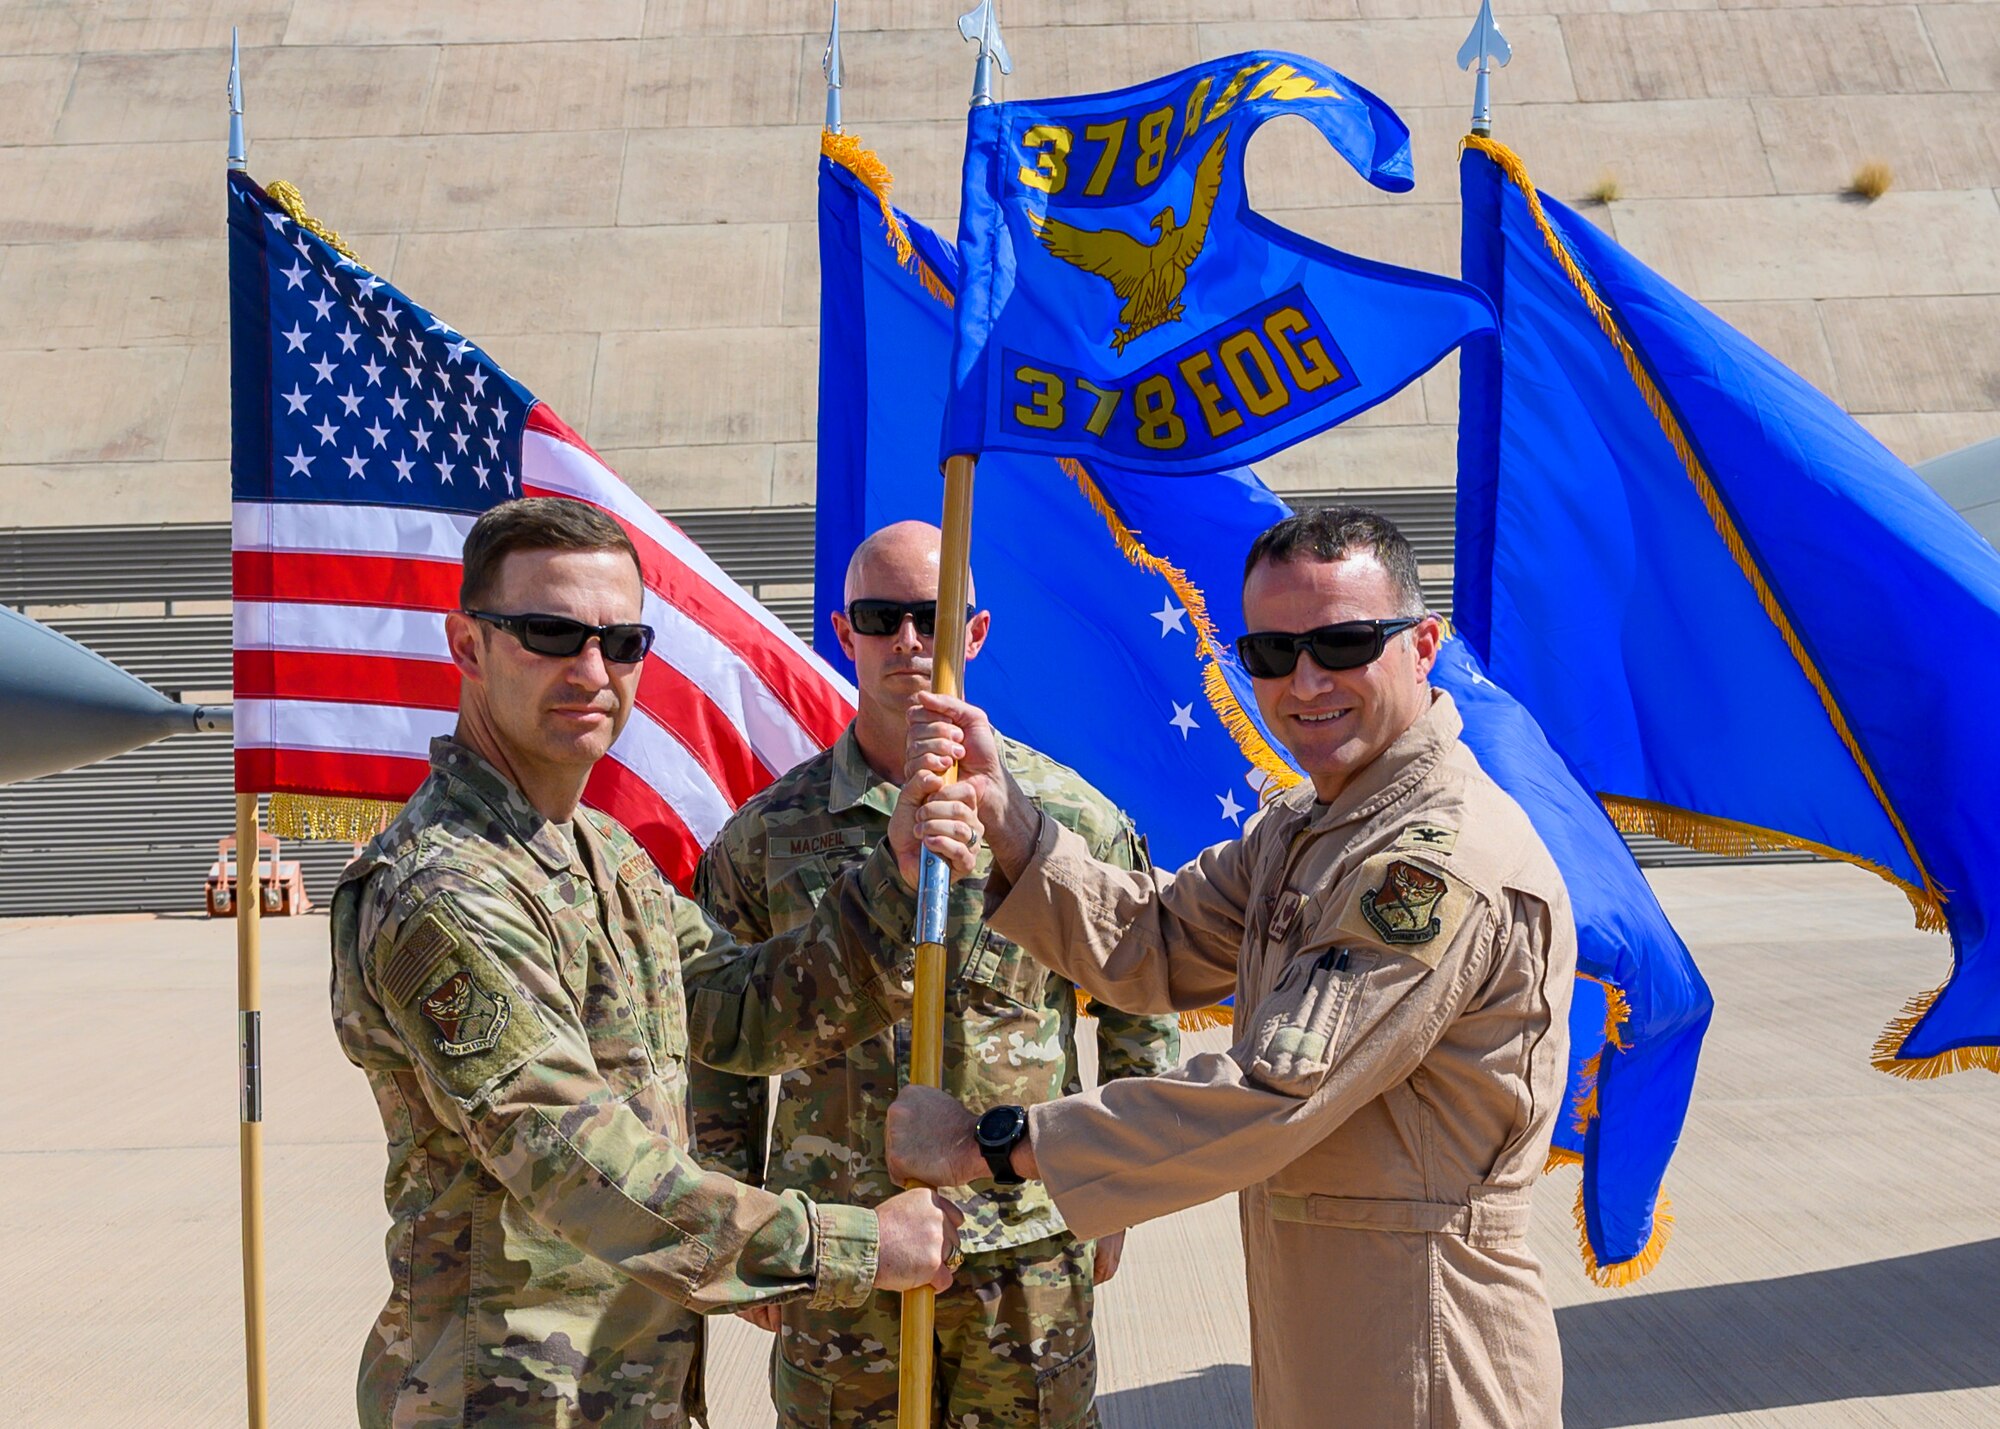 U.S. Air Force Col. Jason “Hollywood” Smith accepts command of the 378th Expeditionary Operations Group from Brig. Gen. Robert Davis, 378th Air Expeditionary Wing commander, during the group change of command, Prince Sultan Air Base, July 5, 2021. The 378th EOG provides combat power projection in support of U.S. Central Command plans and operations. (U.S. Air Force photo by Senior Airman Samuel Earick)